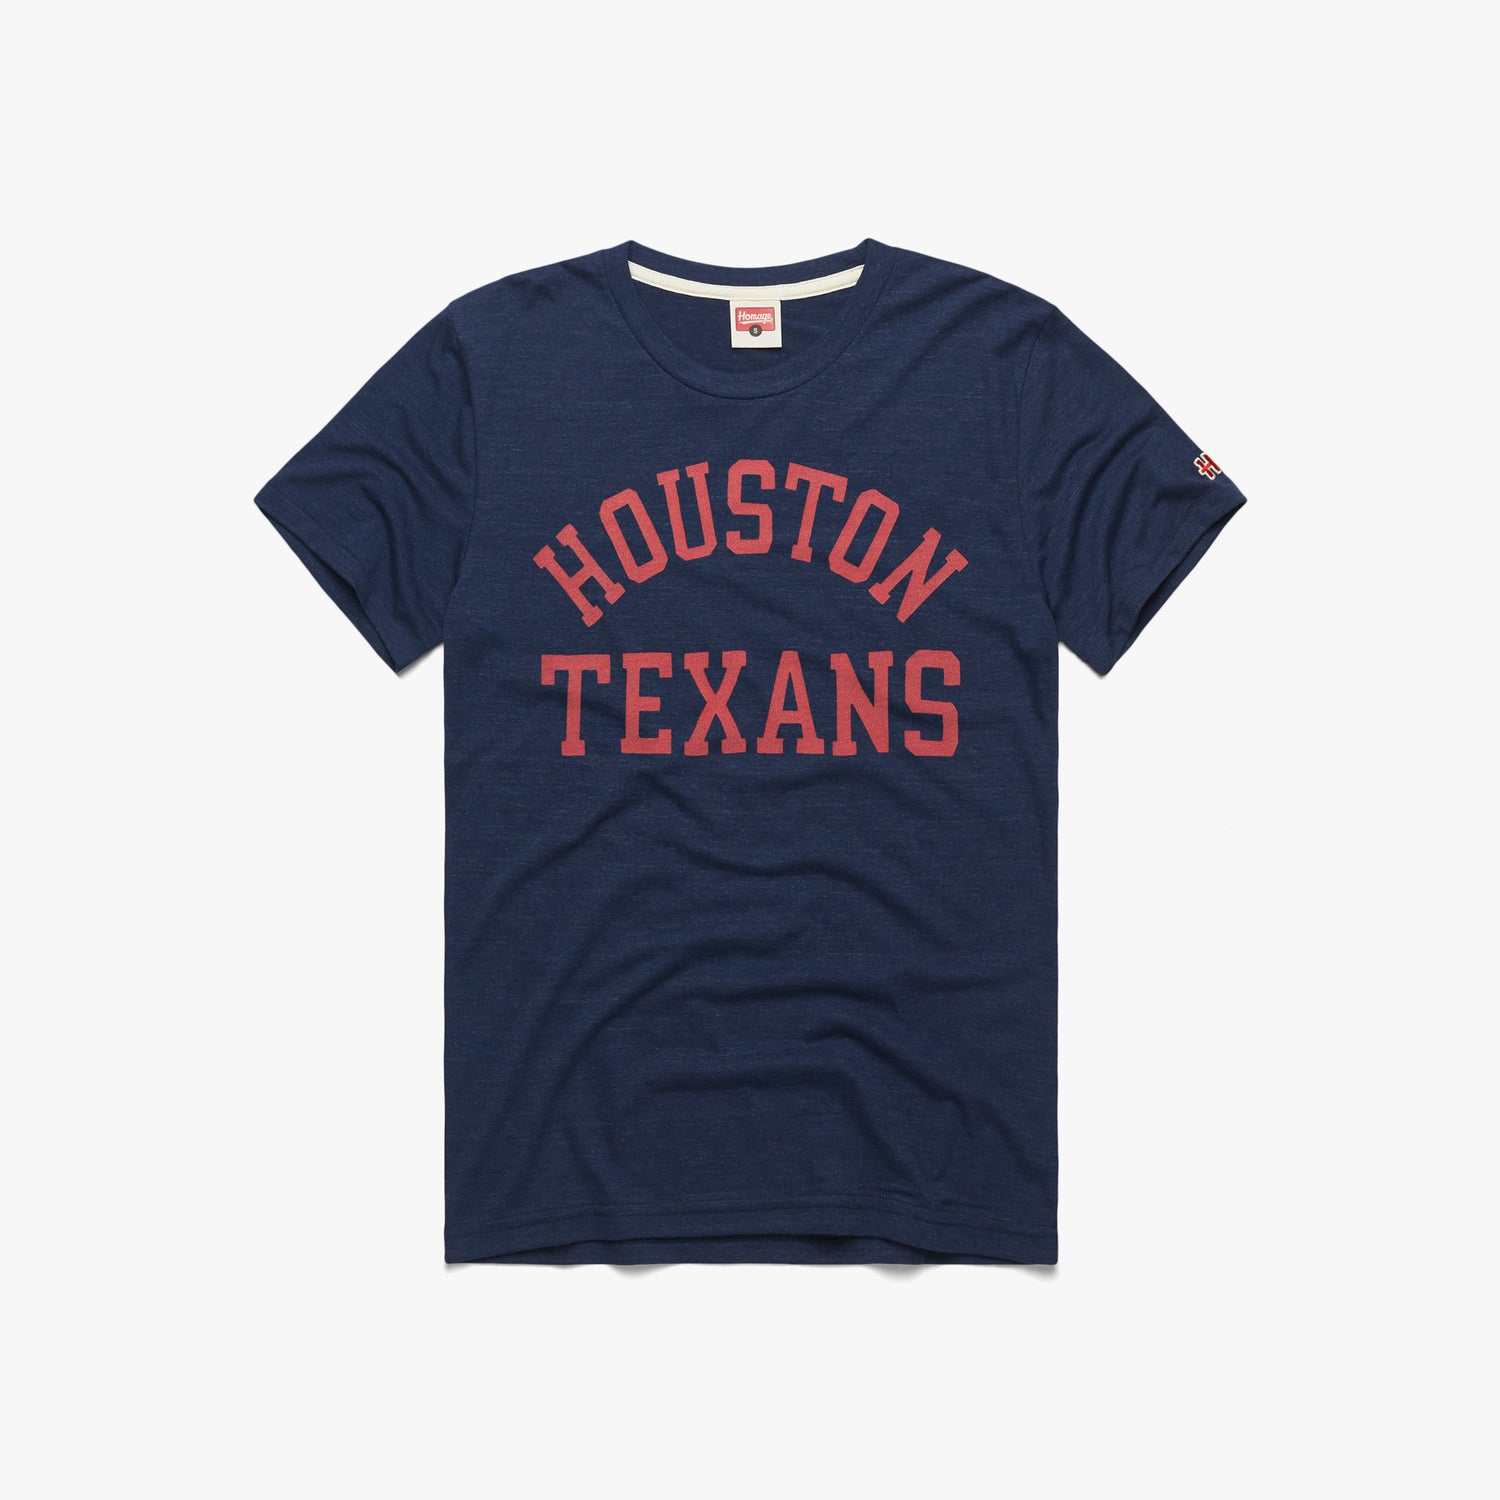 Houston Texans Classic T-Shirt from Homage. | Officially Licensed Vintage NFL Apparel from Homage Pro Shop.